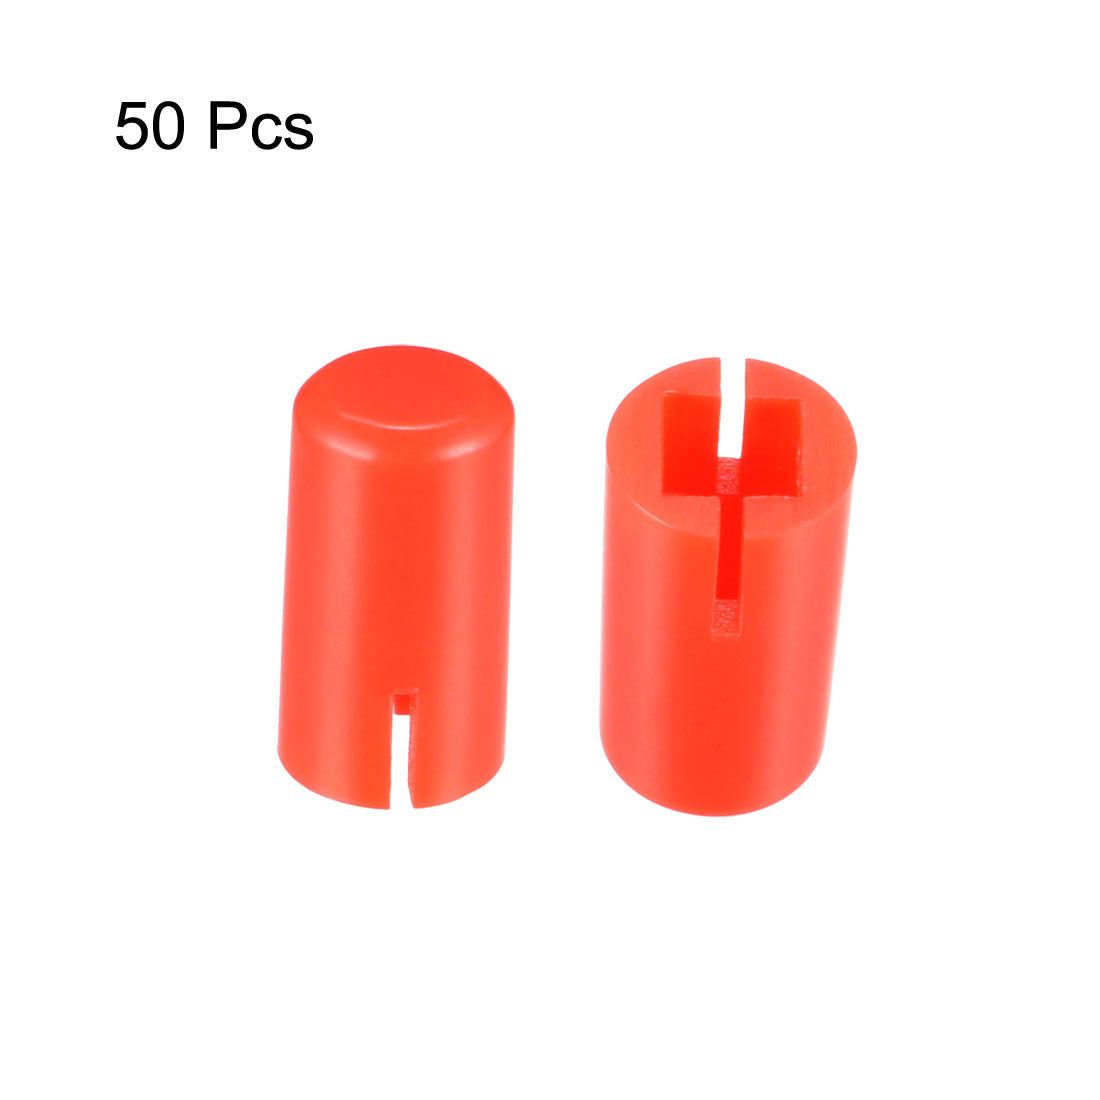 uxcell Uxcell 50Pcs Plastic 5x9mm Pushbutton Tactile Switch Caps Cover Keycaps Red for 6x6x7.3mm Tact Switch